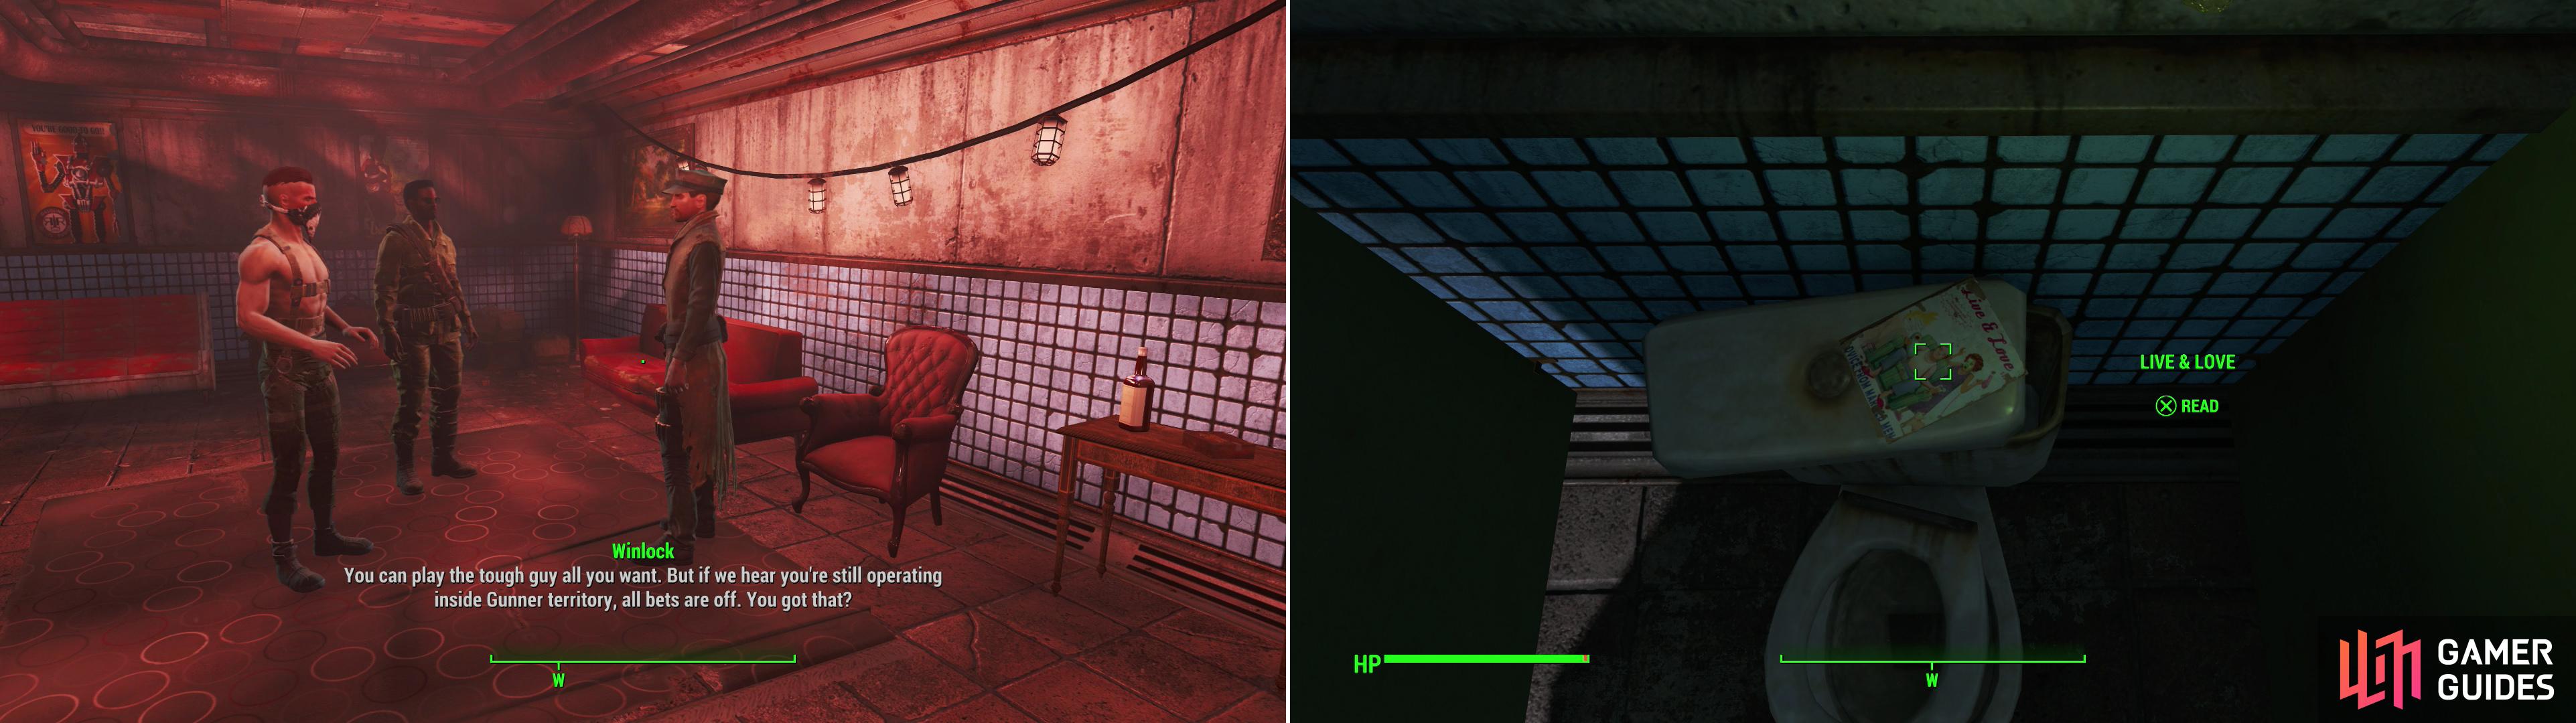 MacCready’s past with the Gunners catches up to him (left). Grab a copy of Live & Love off a toilet in The Third Rail (right).